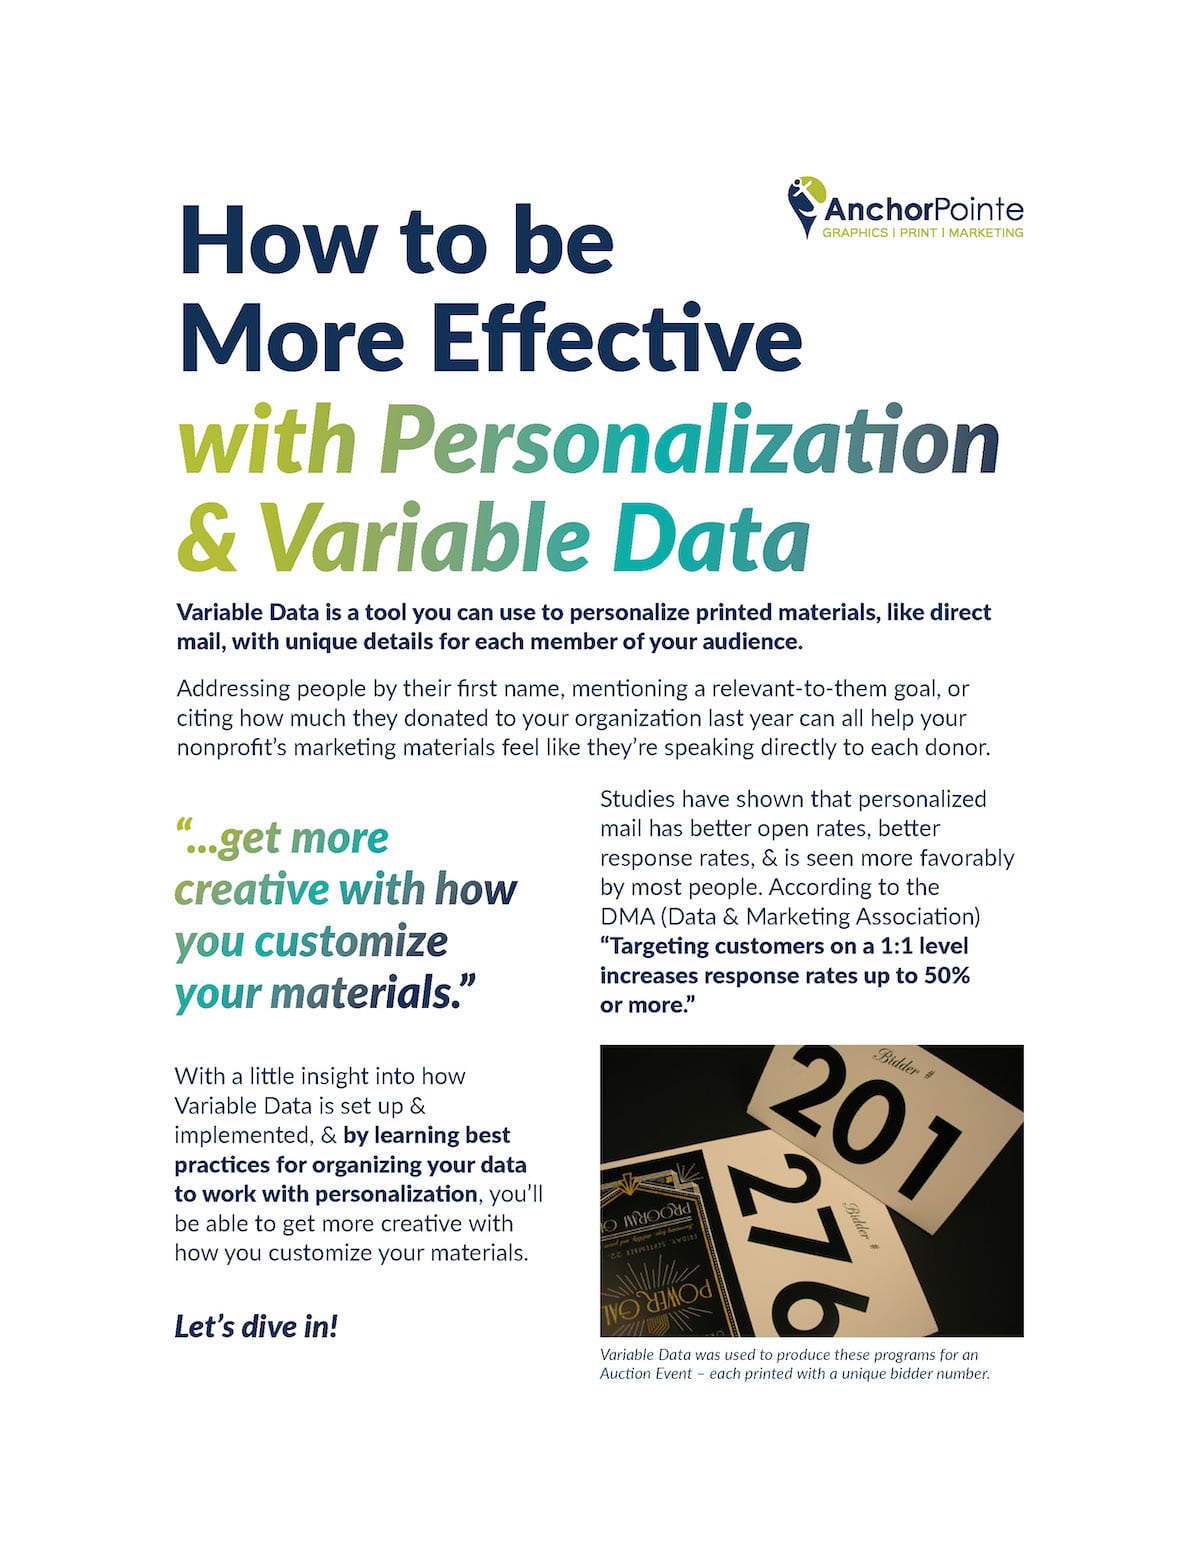 How to be more effective with personalization & variable data